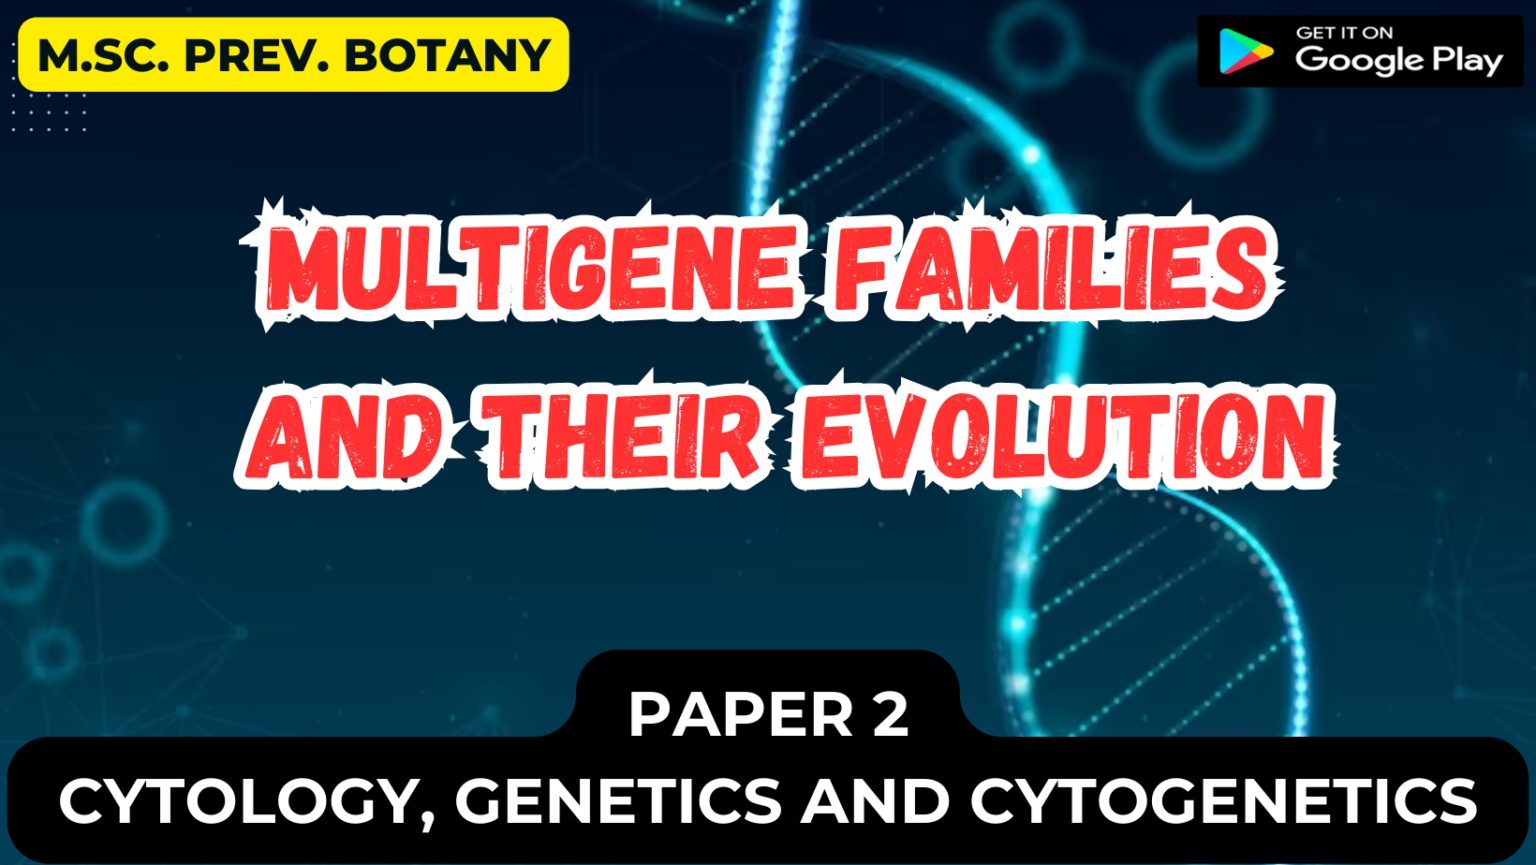 Multigene Families and their Evolution